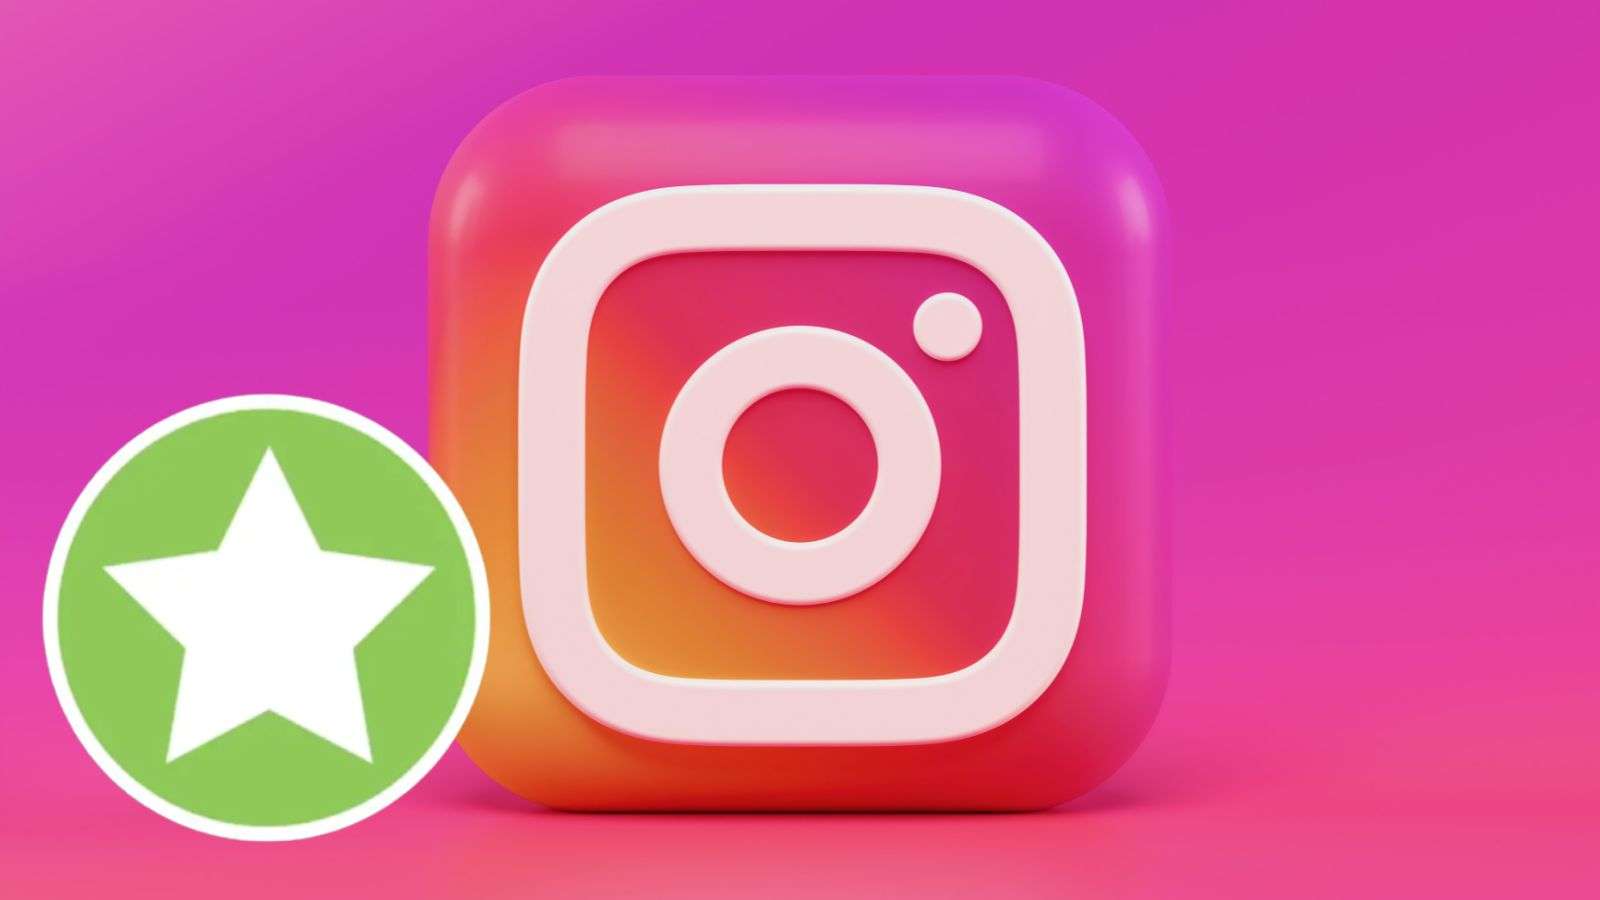 Instagram logo with green close friends symbol